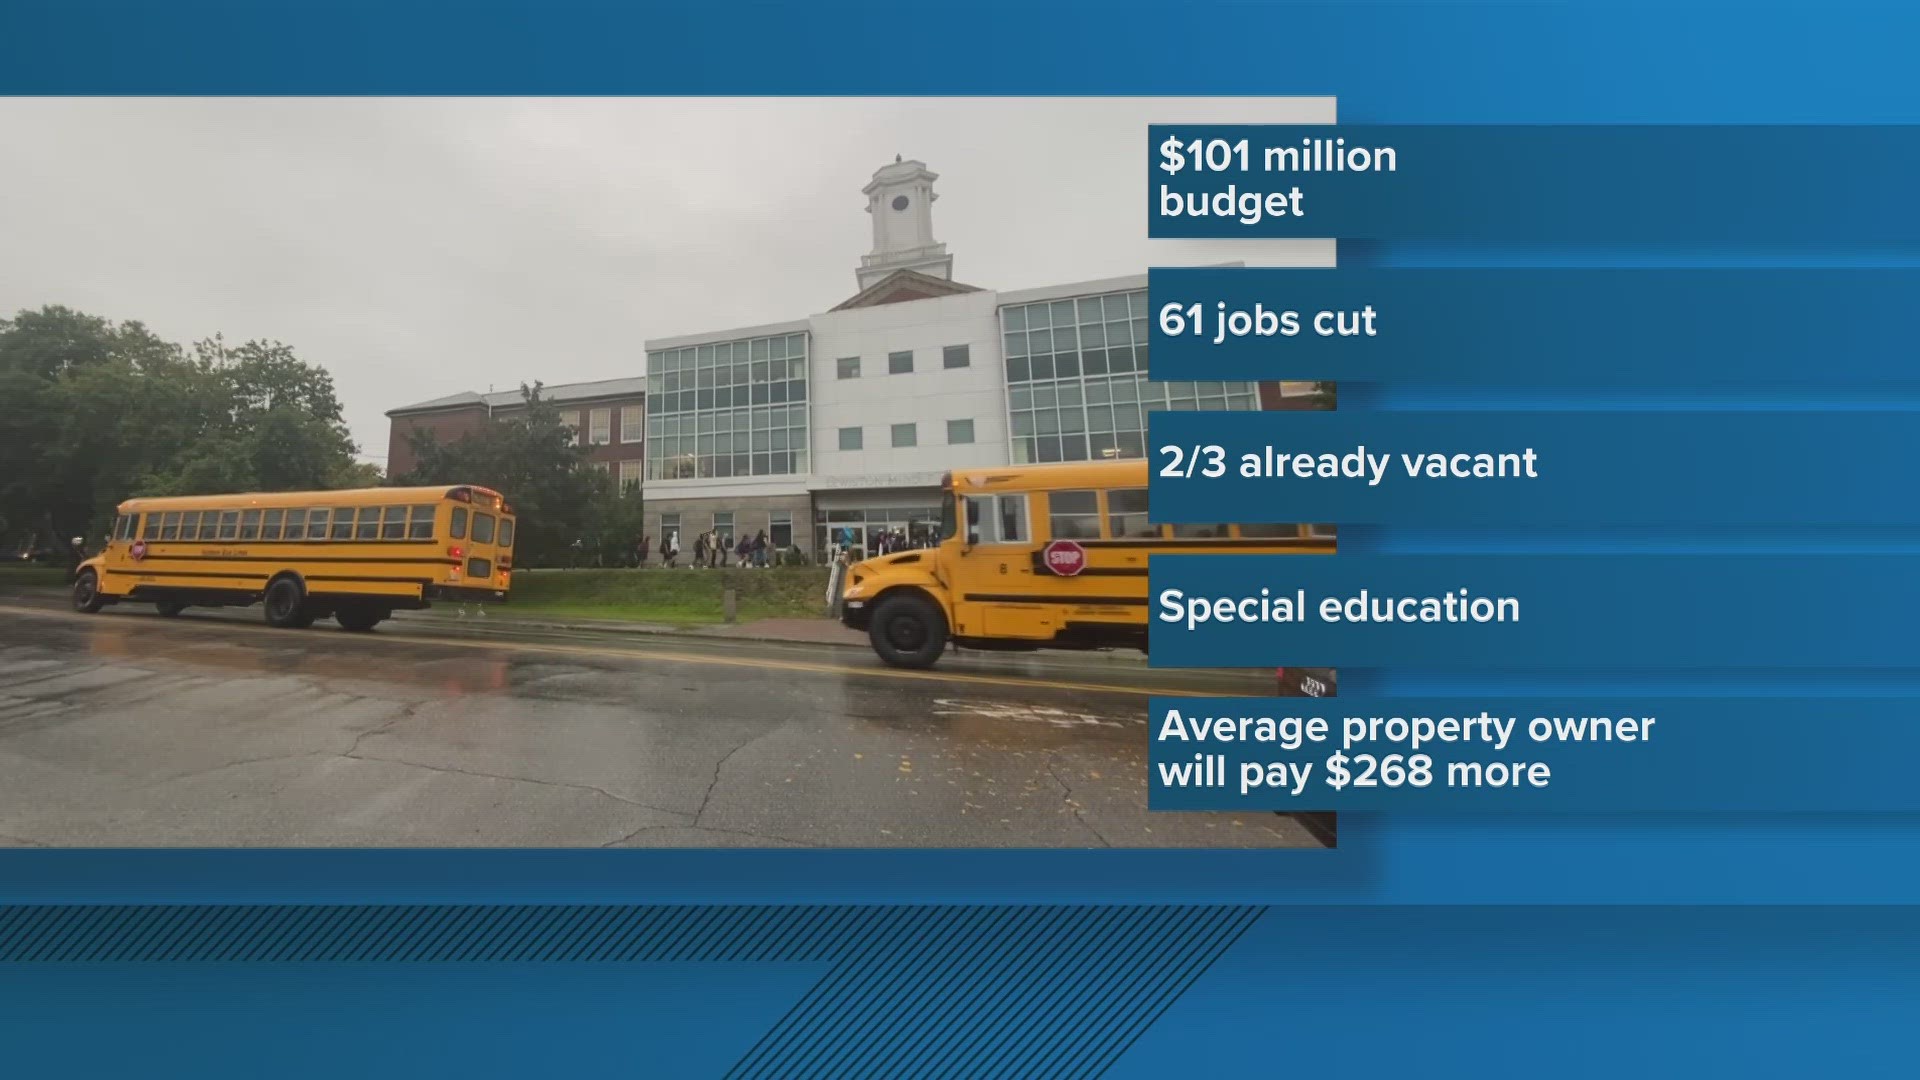 The $101 million spending plan passed last night, and it cuts 61 jobs across the district. Two-thirds of those positions are currently vacant.